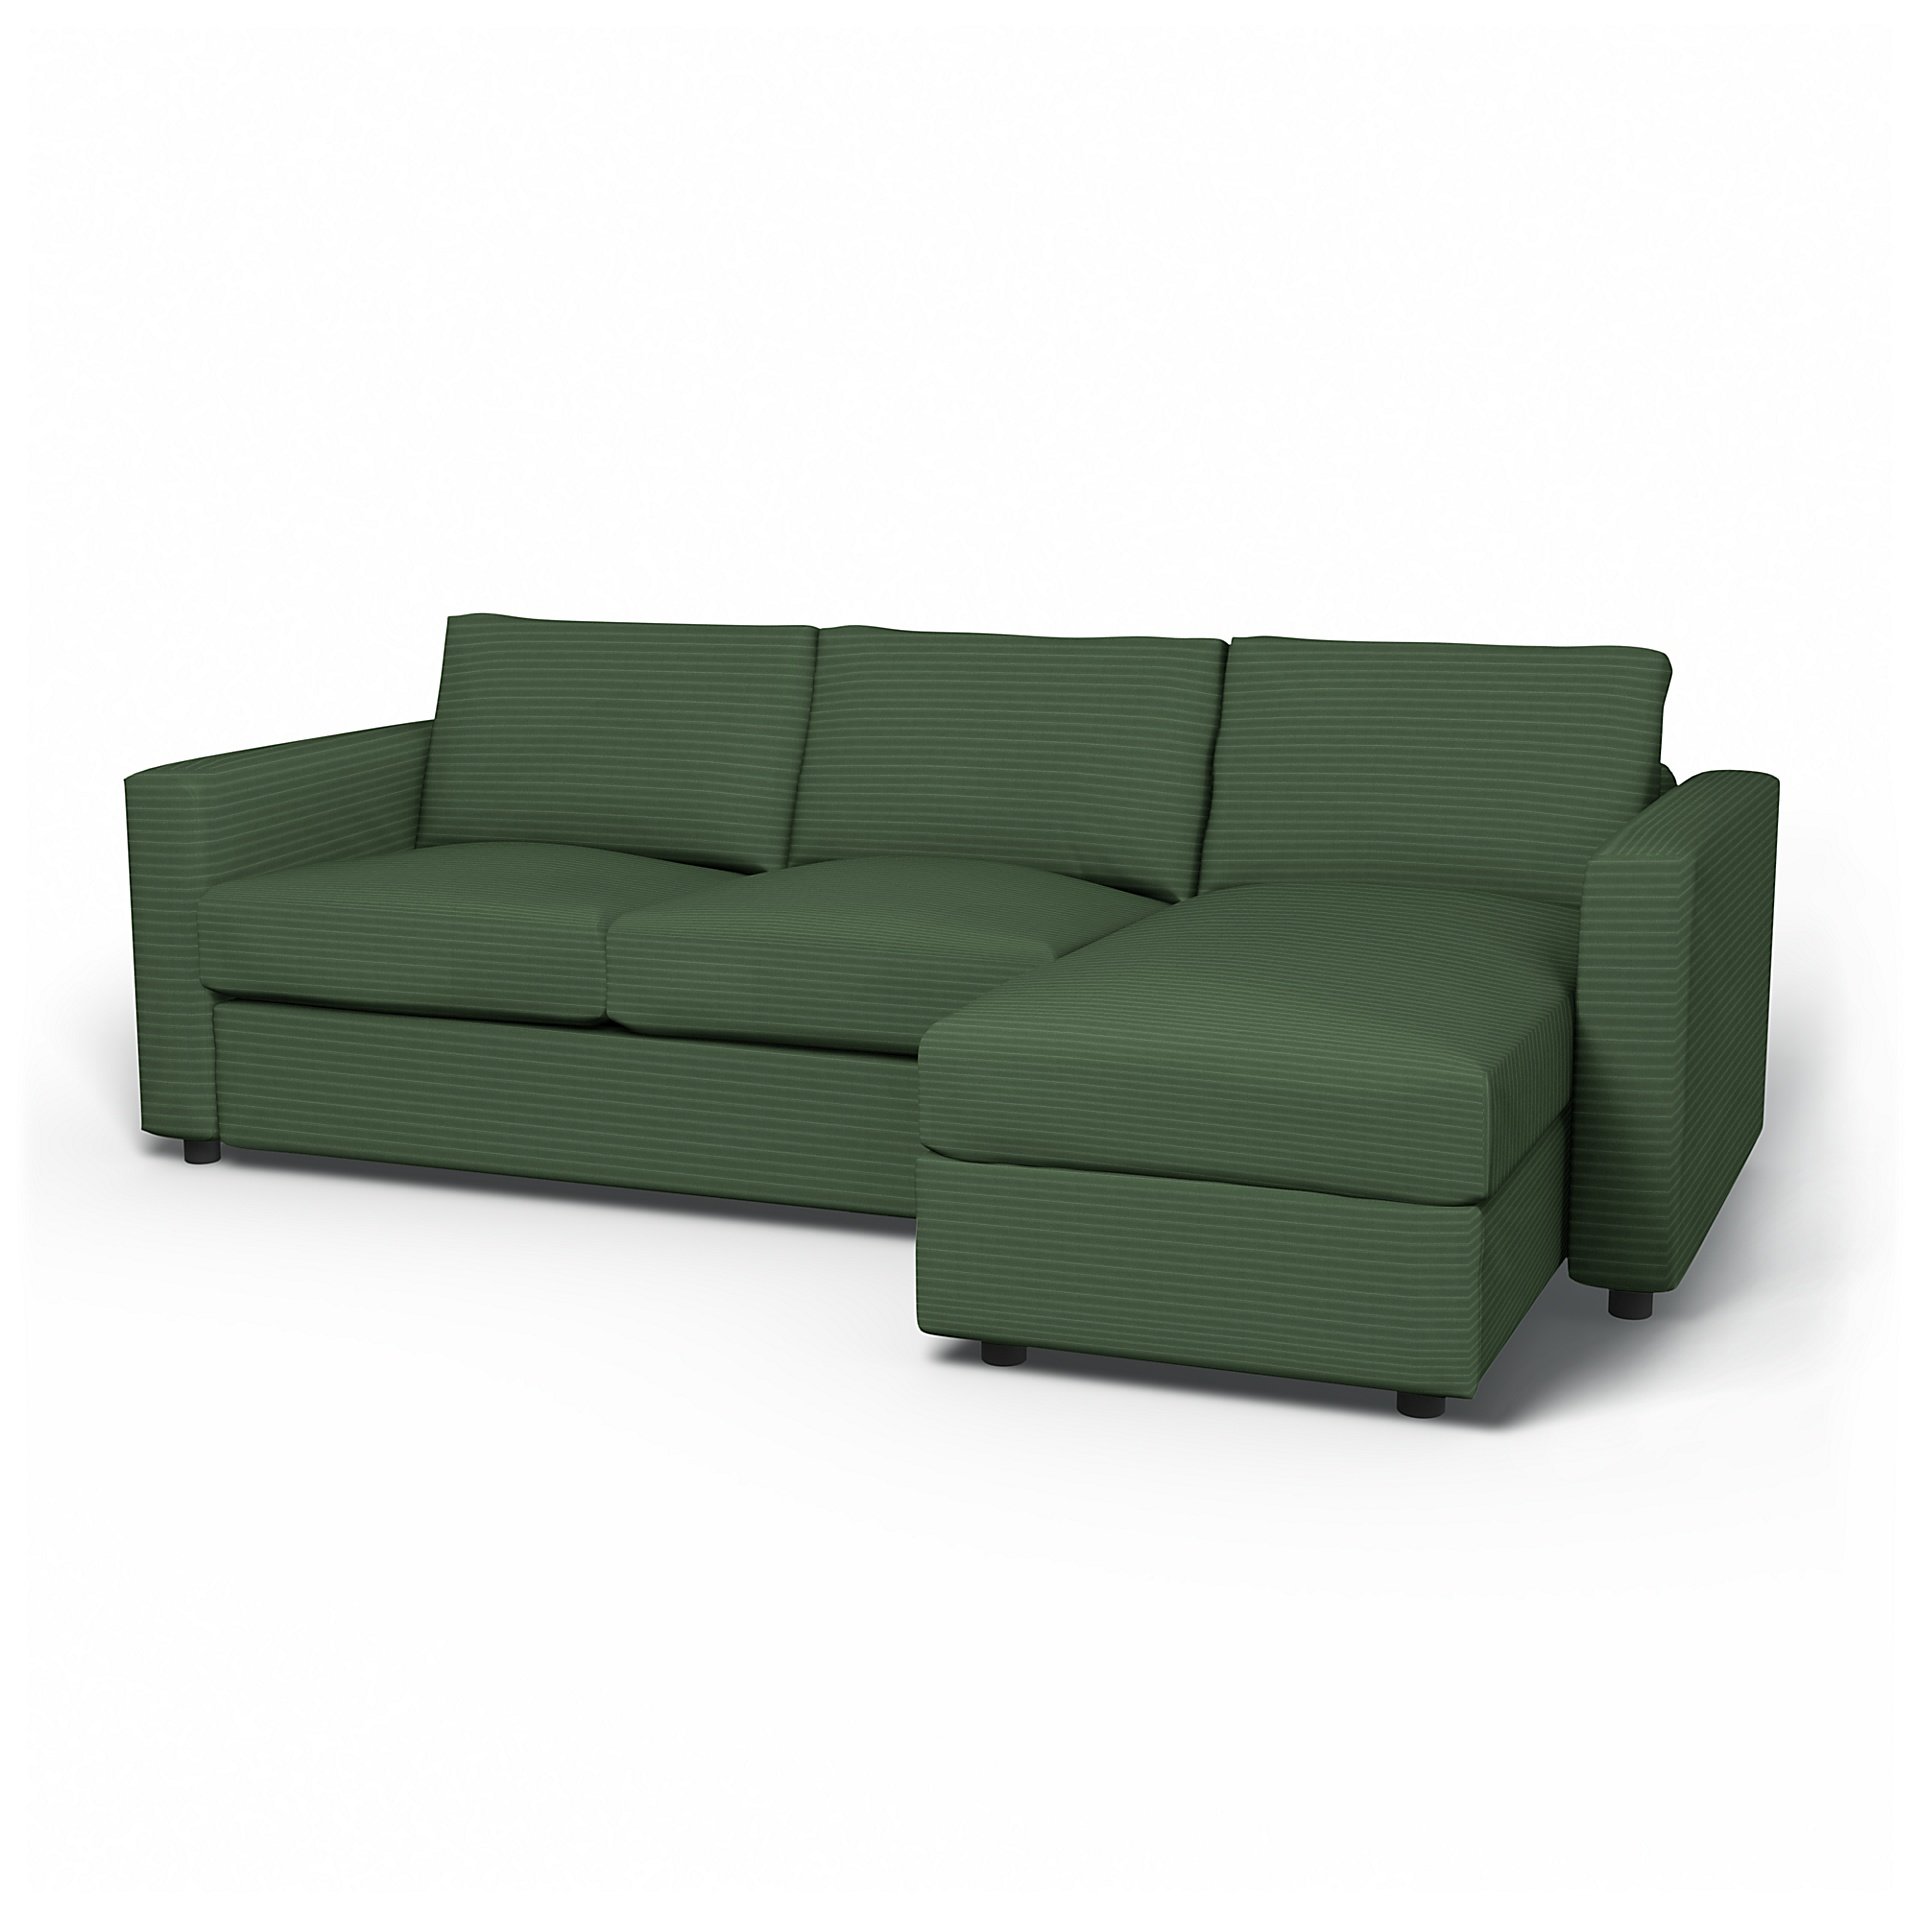 IKEA - Vimle 2 Seater Sofa with Chaise Cover, Palm Green, Corduroy - Bemz